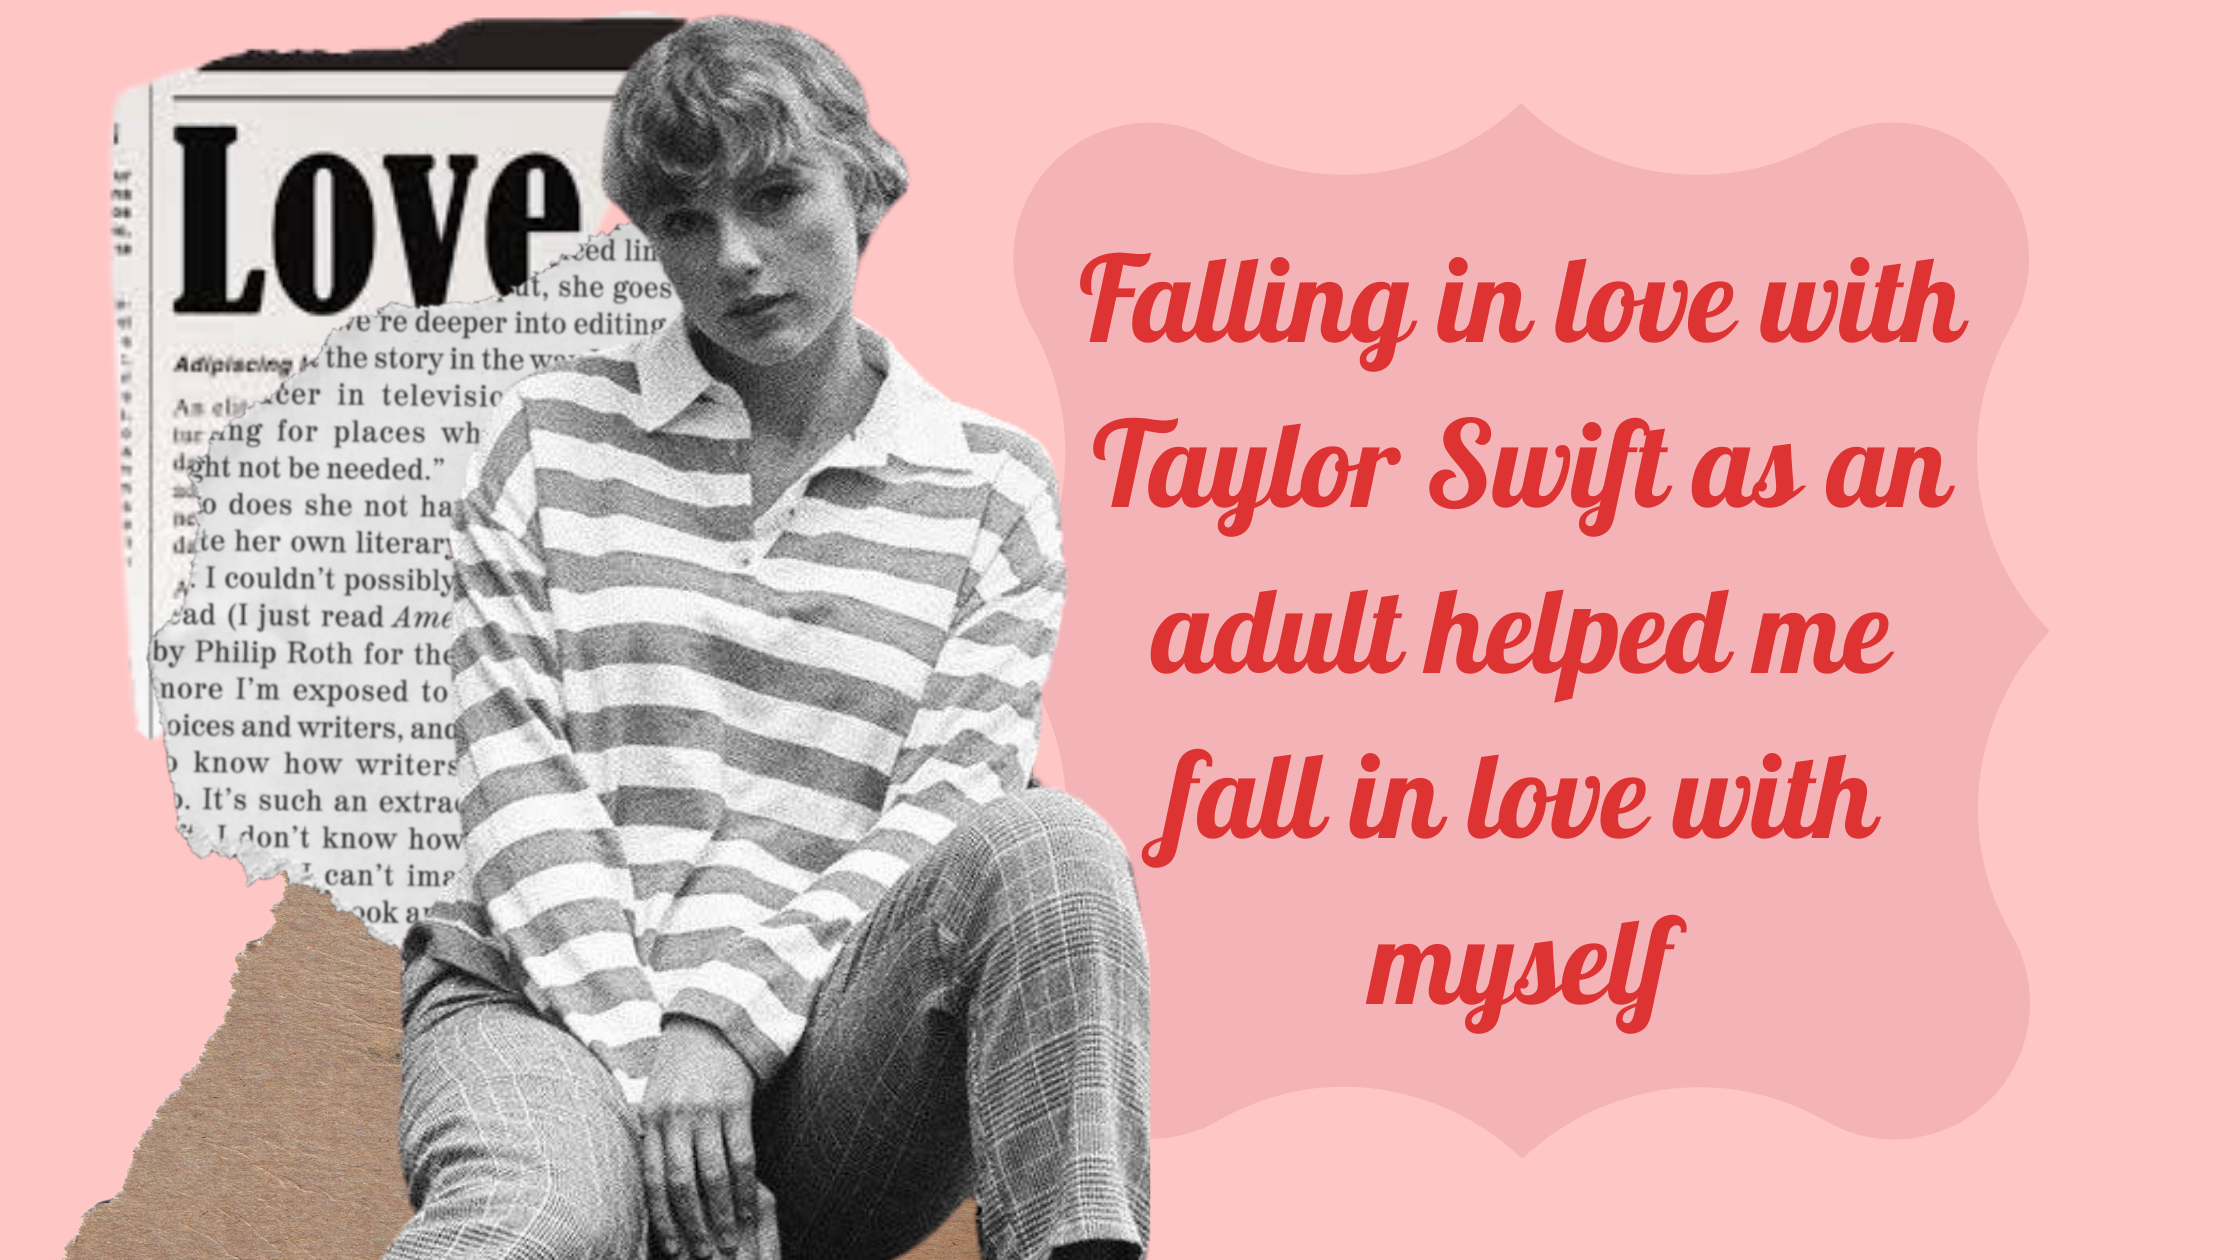 Falling in love with Taylor Swift as an adult helped me fall in love with myself